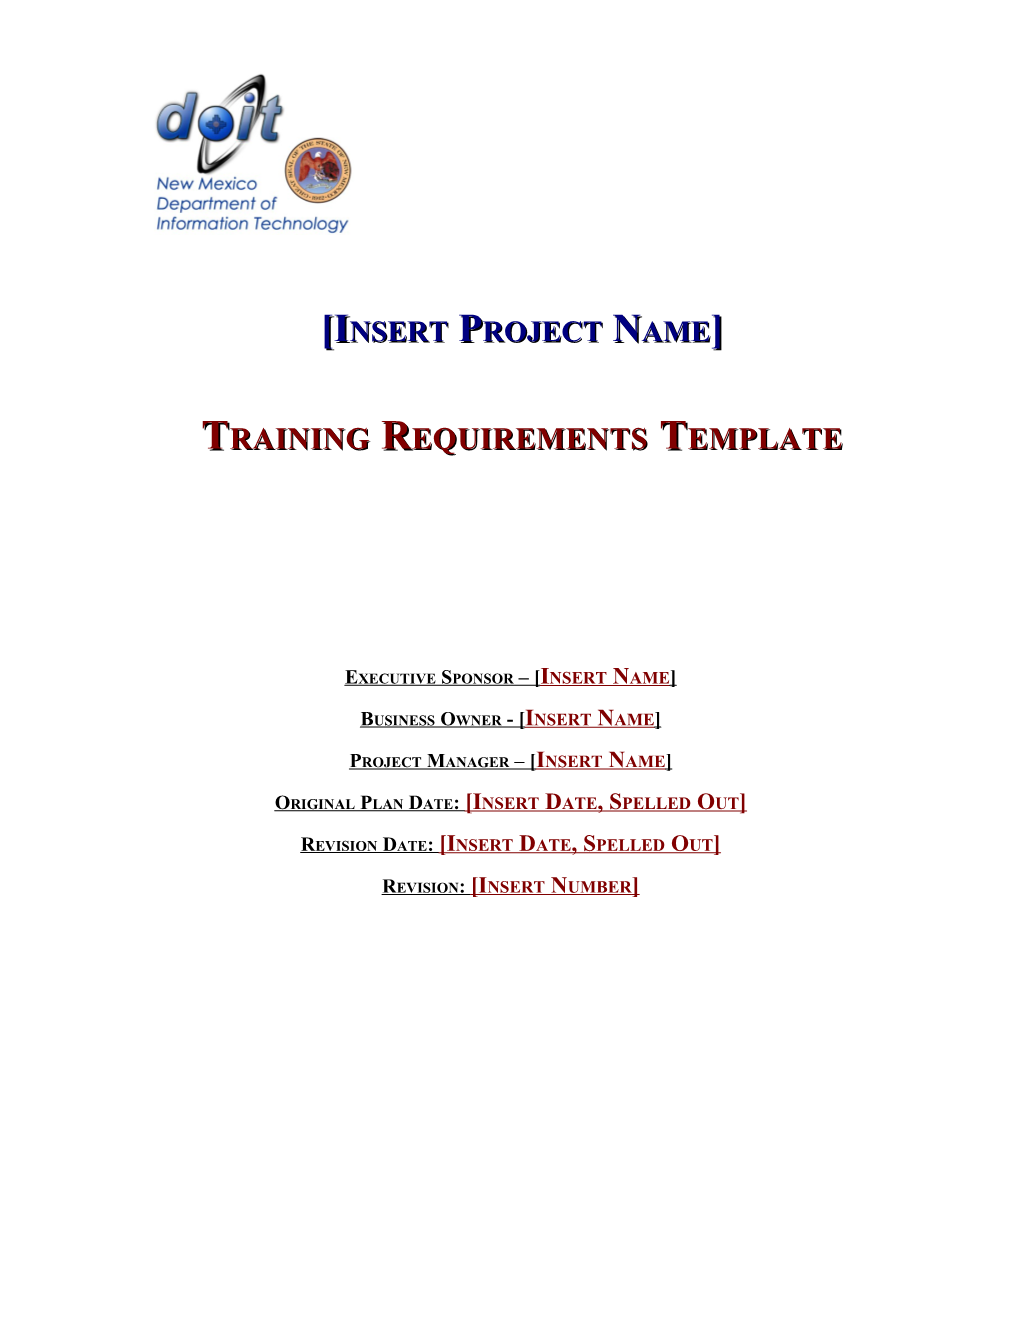 SDP-21 Training Requirements Document Template